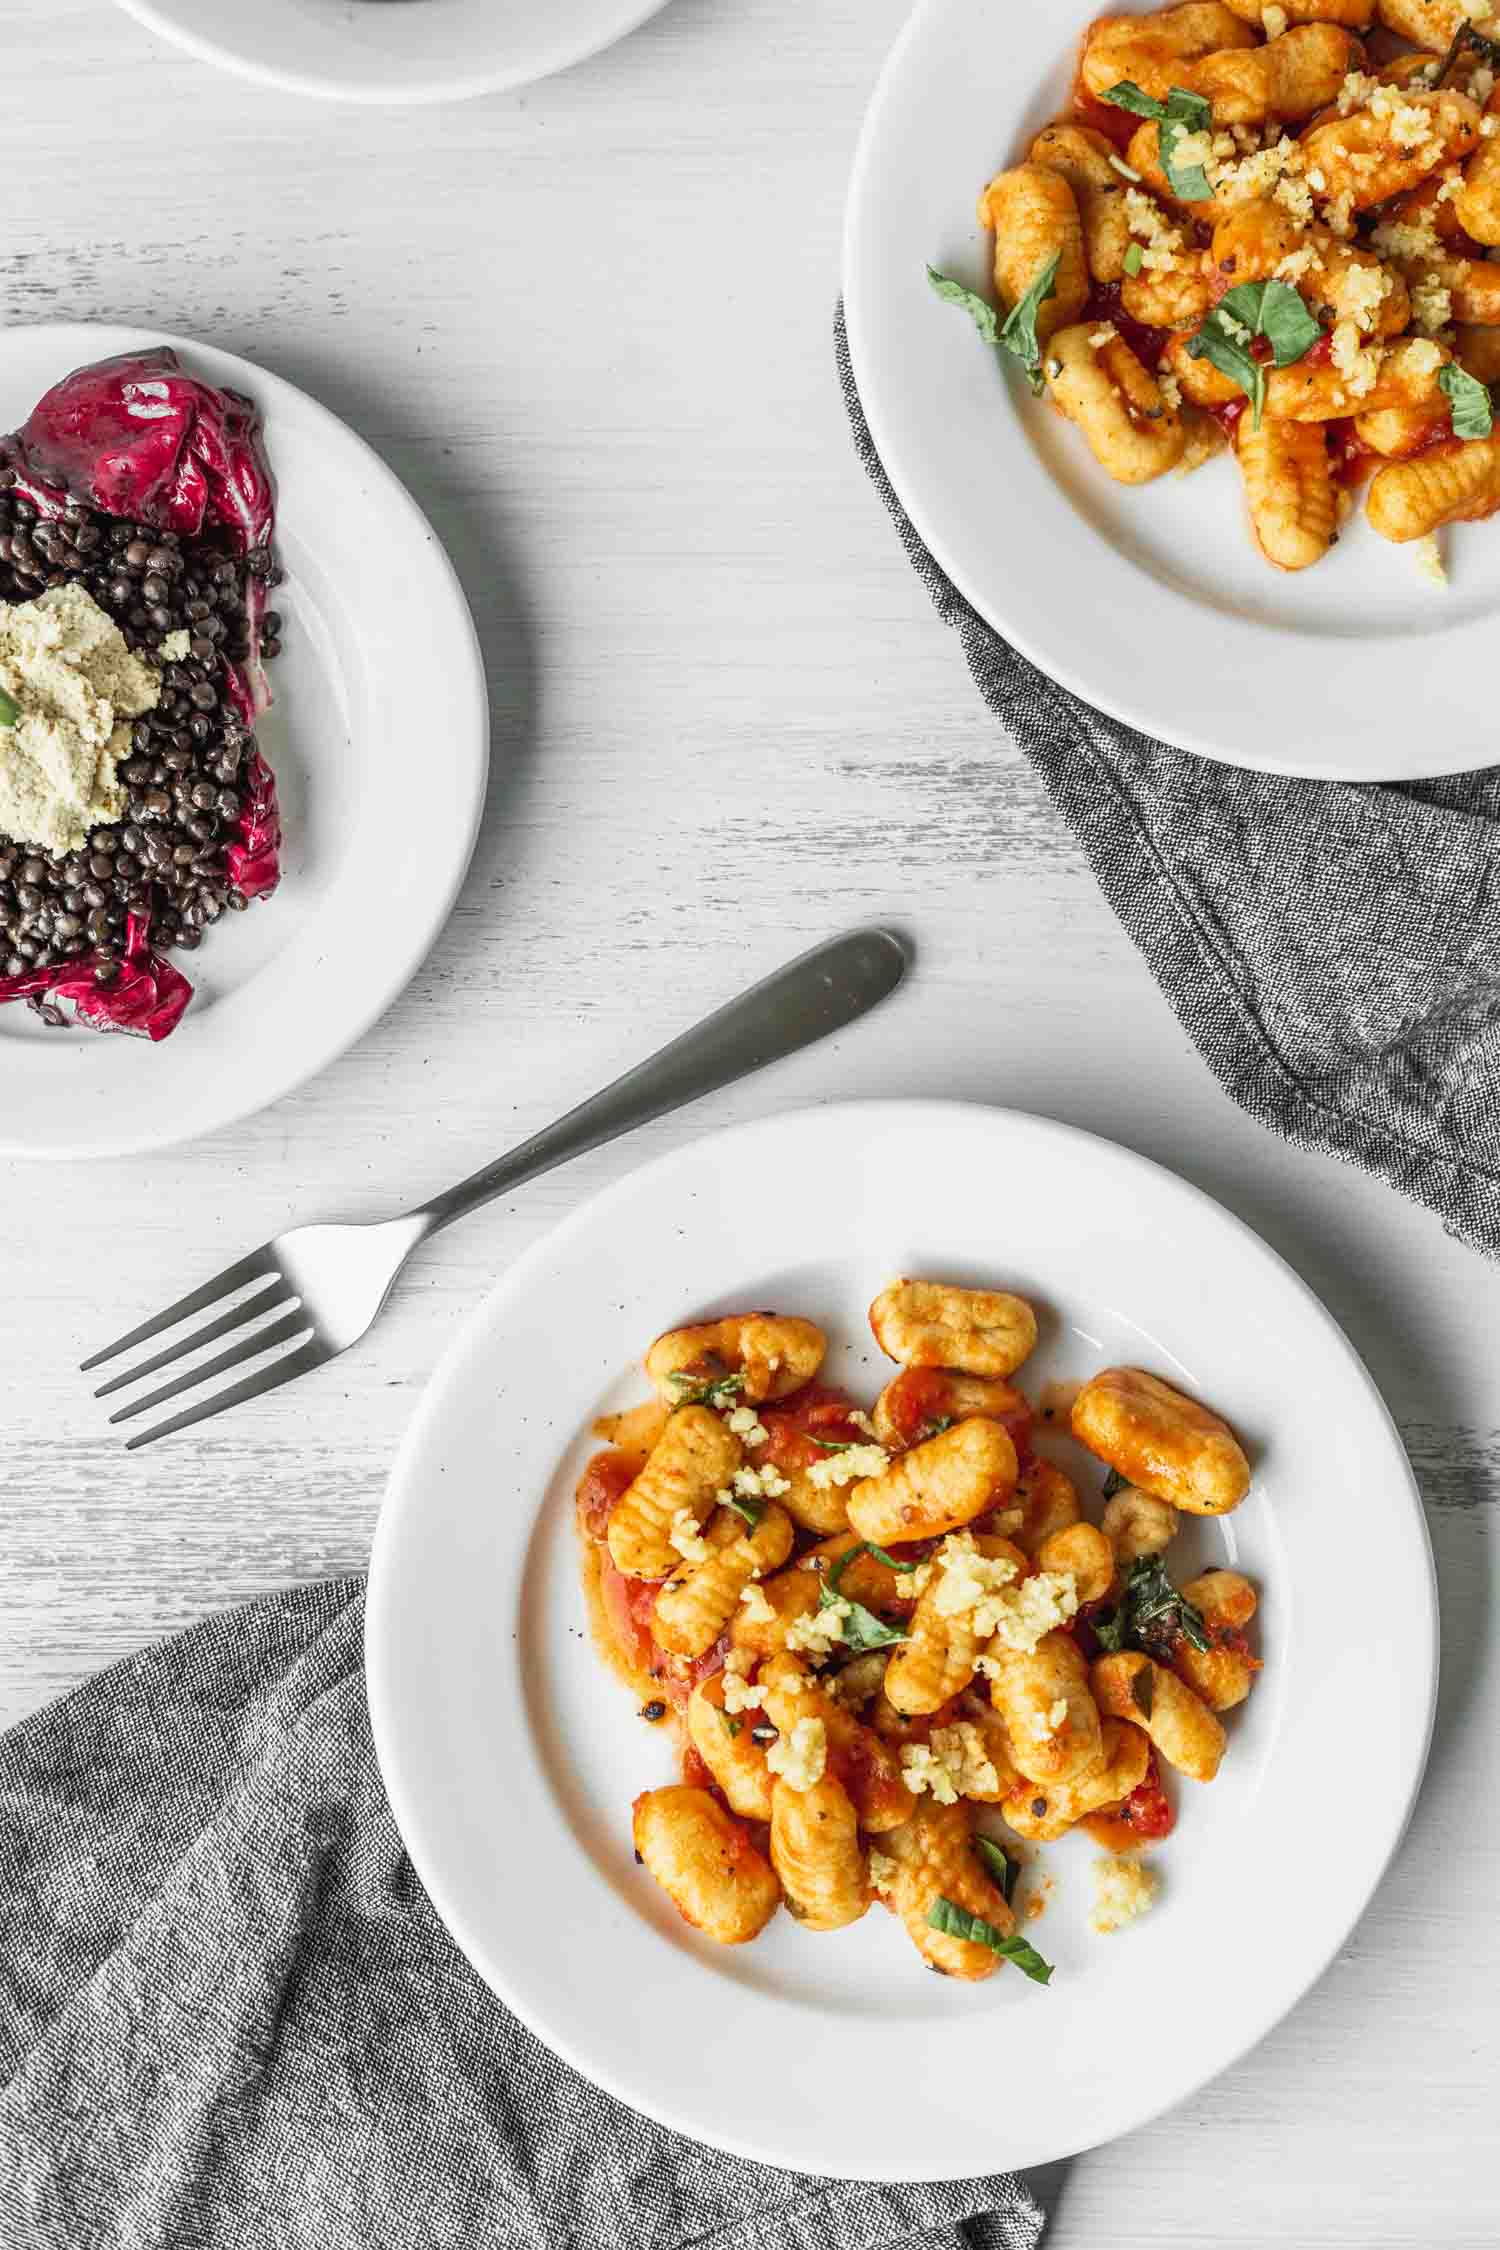 Gluten-free Dairy-free Gnocchi Recipe from  The Plantpower Way: Italia Cookbook  by Julie Piatt and Rich Roll. Photo by Kari of Beautiful Ingredient.